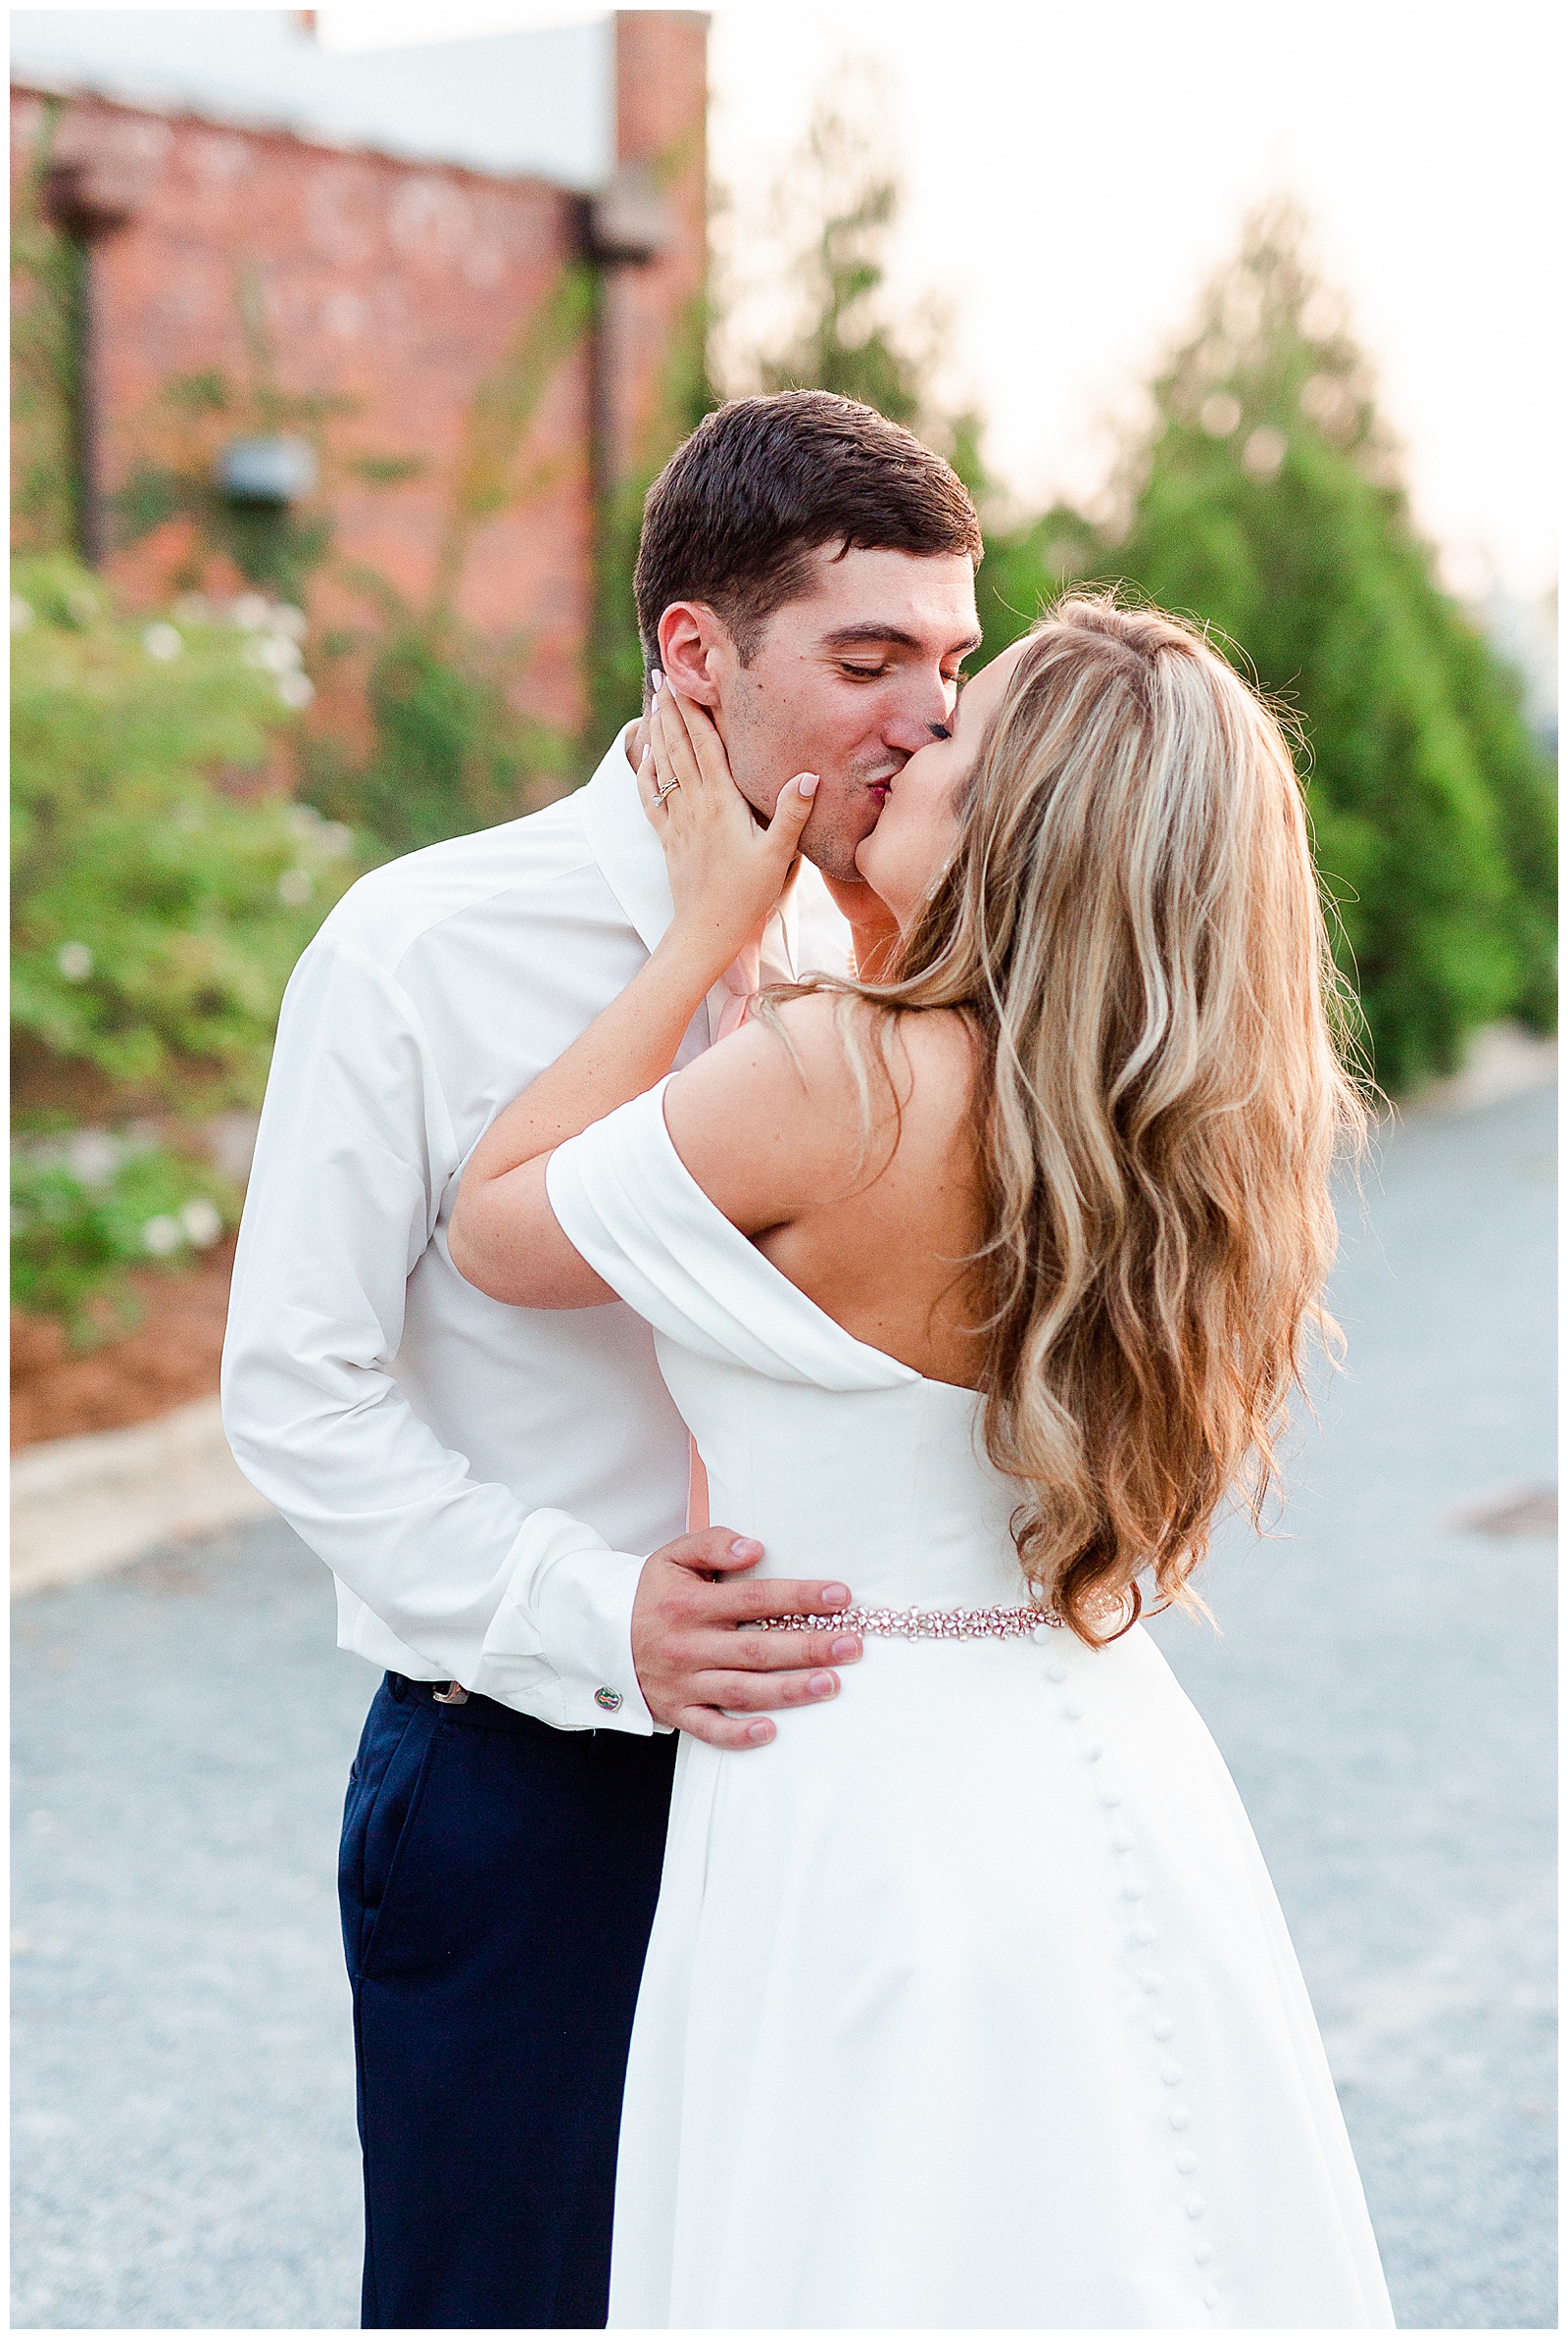 Stunning Modern Bride and Groom with off shoulder wedding dress and blue suit in outdoor portraits in empty parking lot from Summer Wedding in Charlotte, NC | Check out the full wedding at KevynDixonPhoto.com